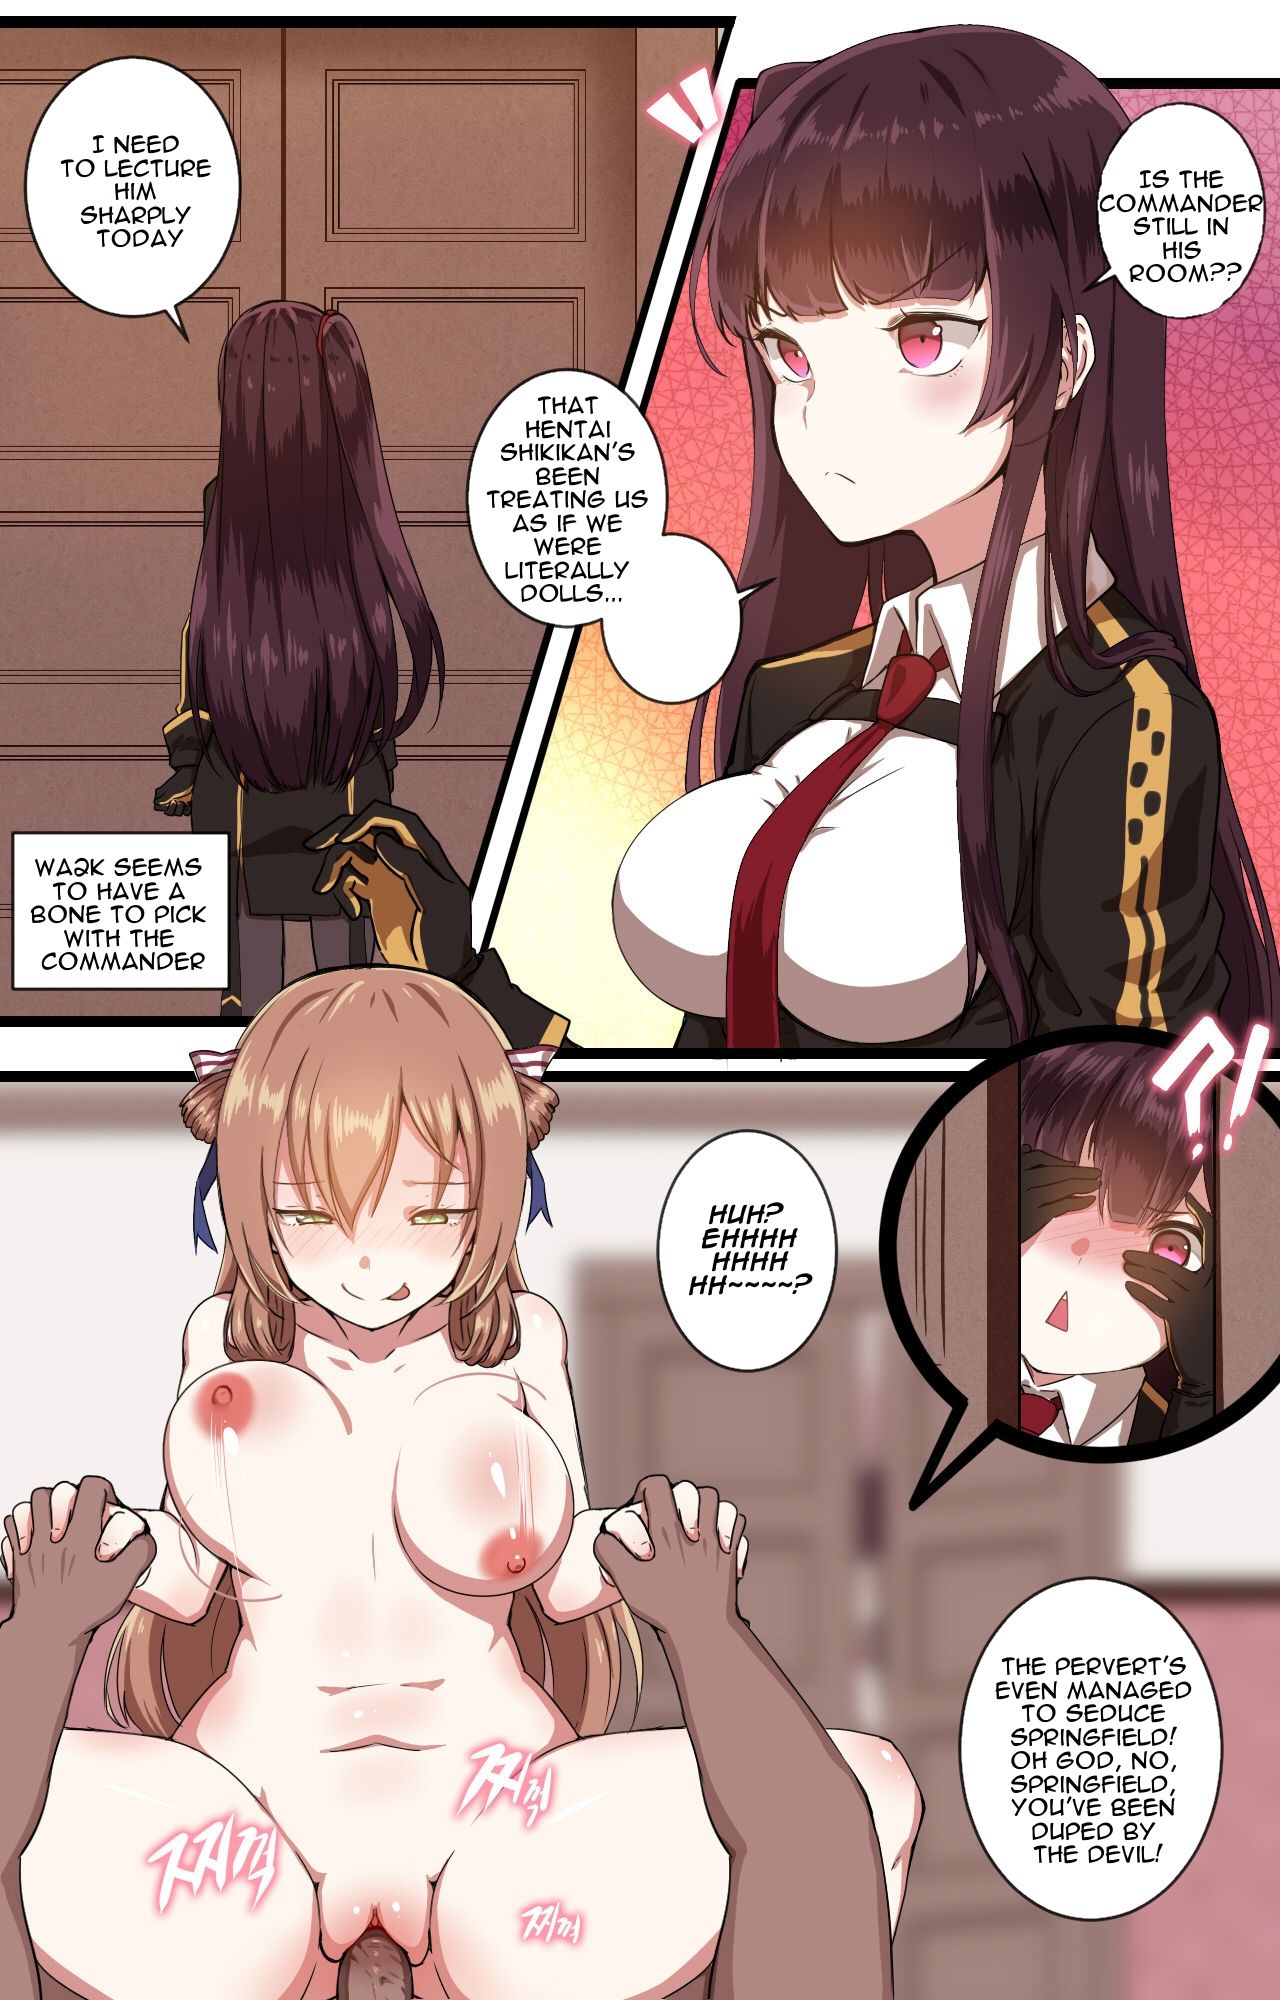 [yun-uyeon (ooyun)] How to use dolls 02 (Girls Frontline) [English] page 2 full